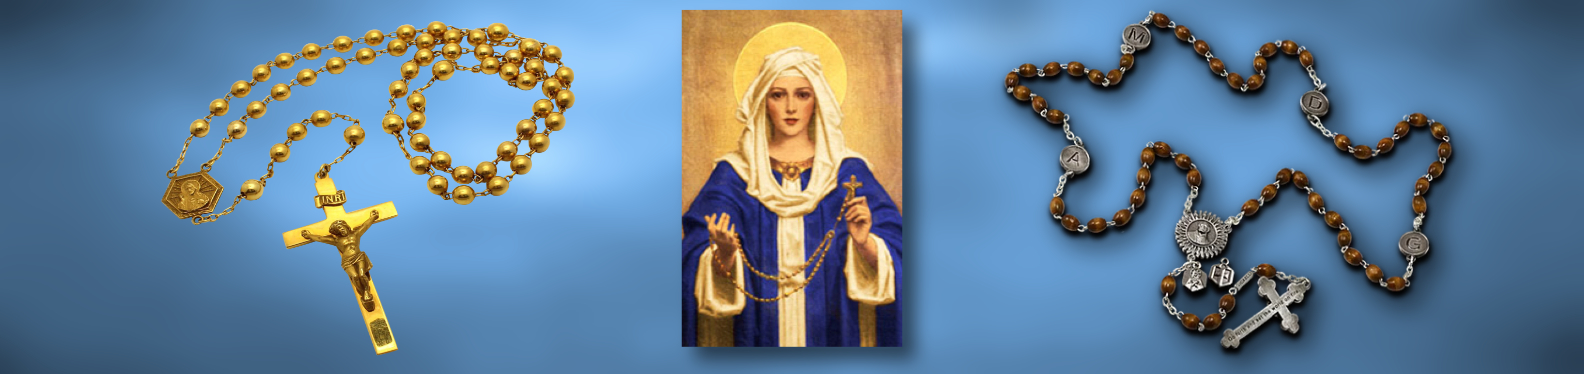 Mary holding a Rosary with 2 more Rosaries, one on each side of her